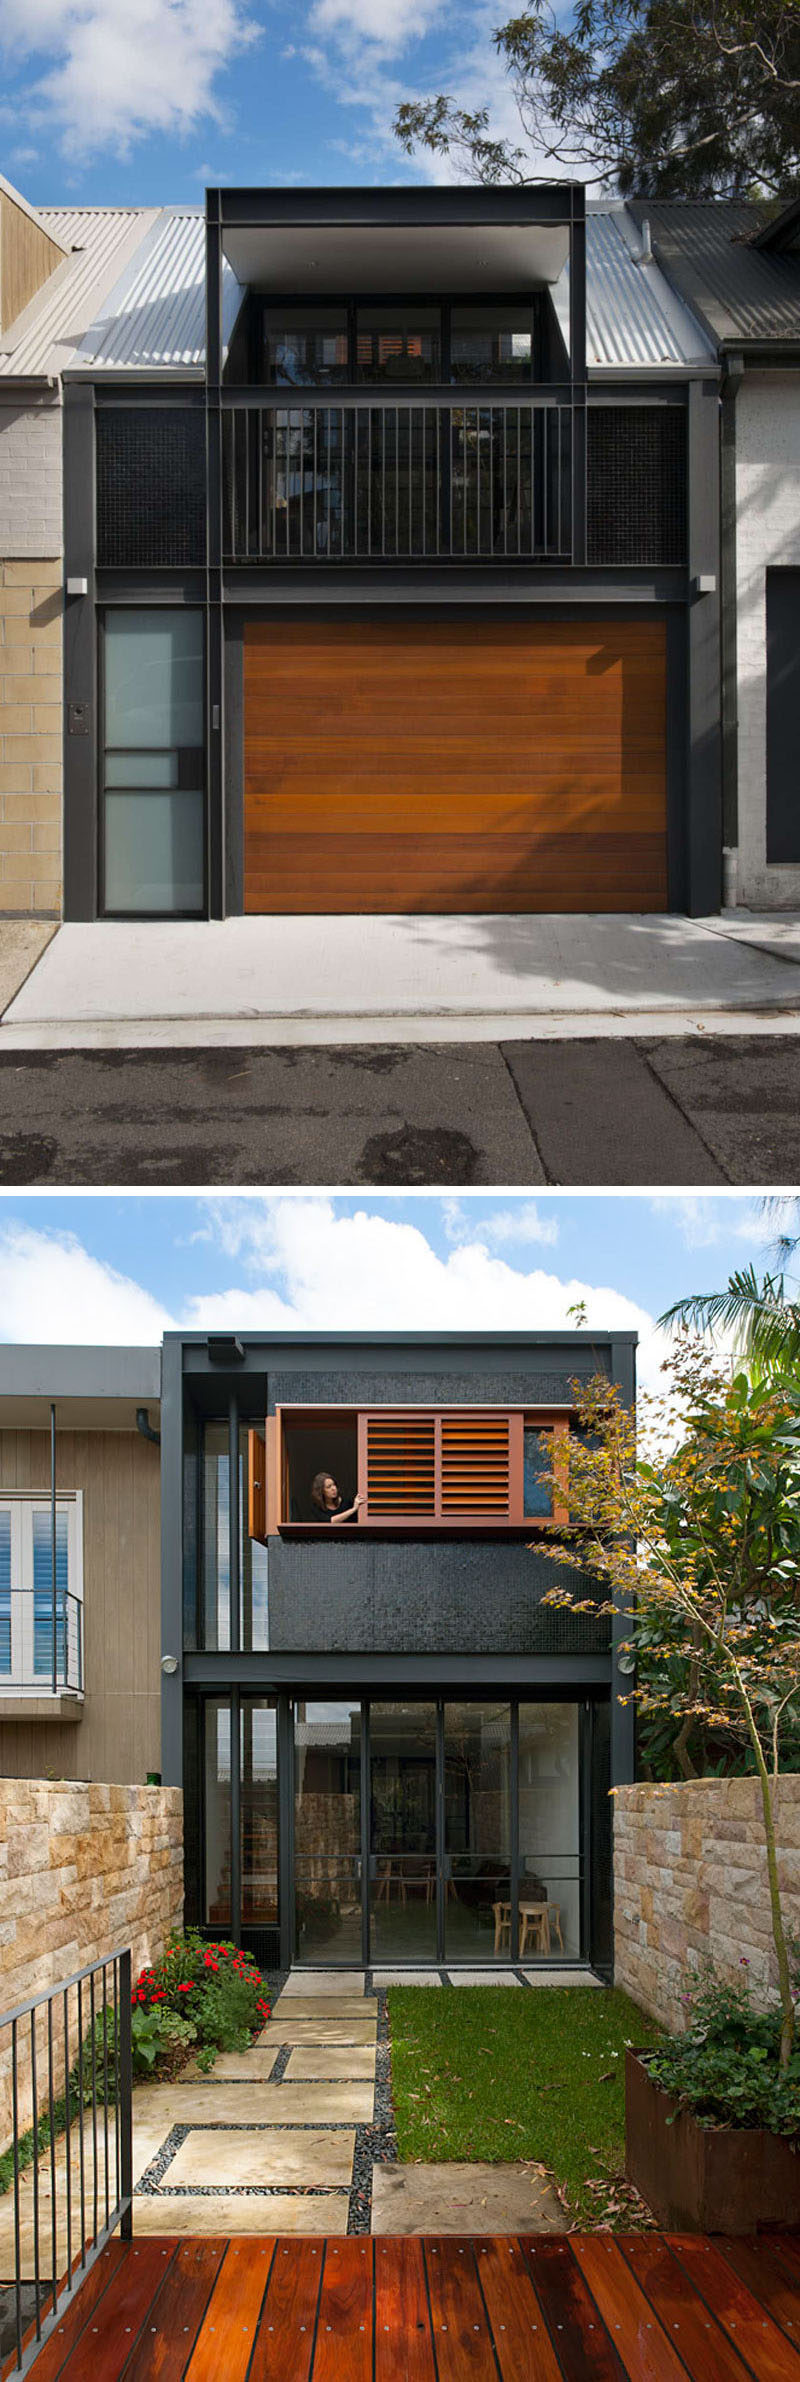 Celebrate Australia Day With These 14 Contemporary Australian Houses | This Sydney home opens up to an inner courtyard to enjoy an indoor/outdoor living.